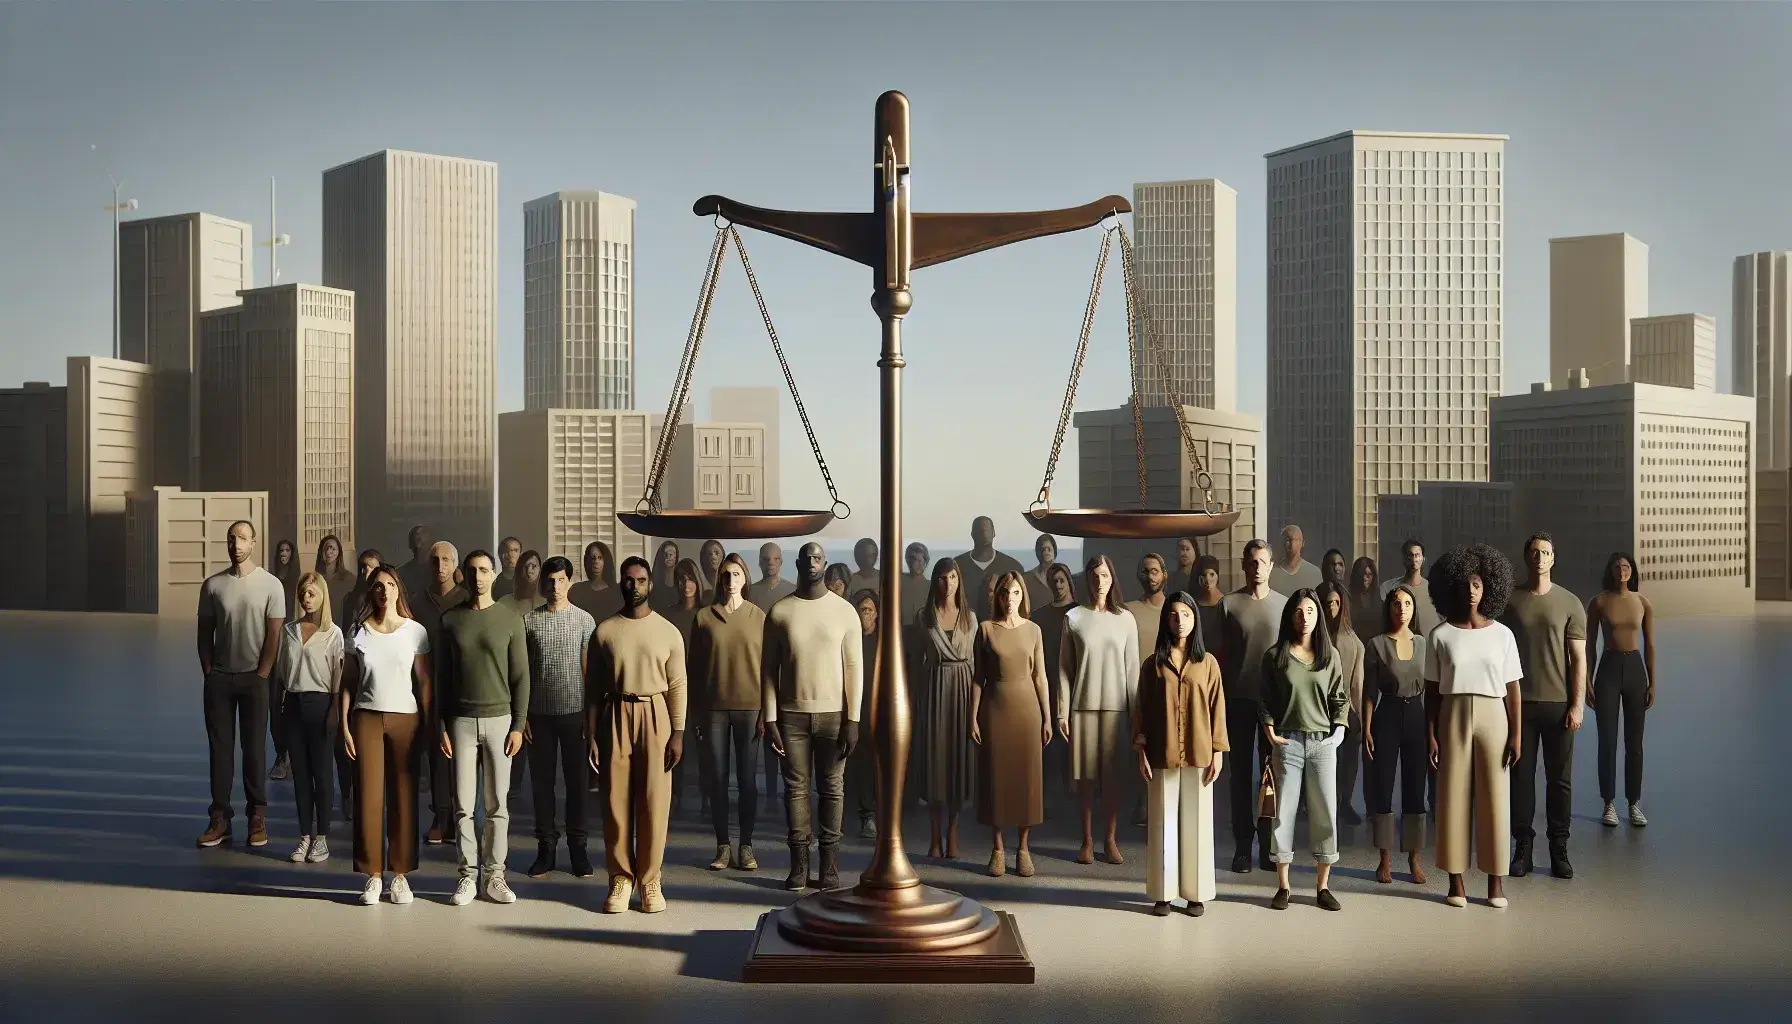 Multi-ethnic group in semicircle with men and women in casual clothes, bronze scales balanced in foreground, neutral urban background and clear sky.